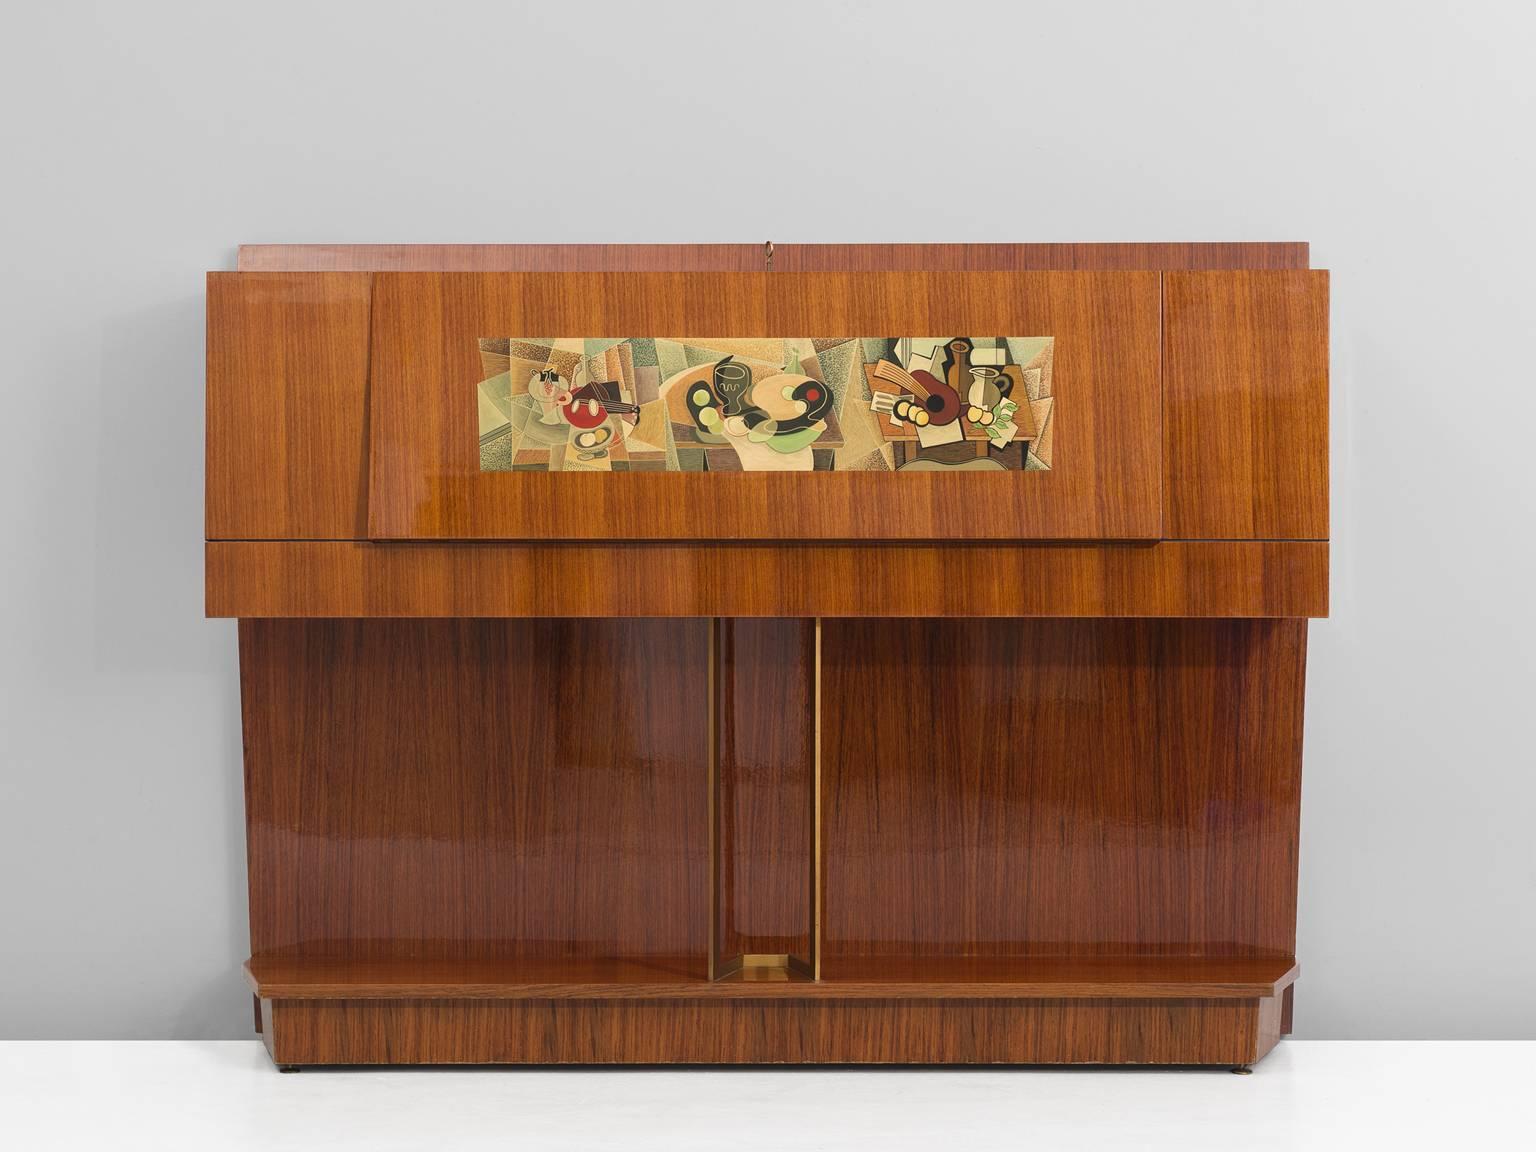 Dry bar in walnut, birch and glass, Italy 1950s.

Italian buffet with beautiful decorative painting on the front by Gino Severini. This bar has an interesting design which reminds a bit of a piano. The storage part is wide, followed by a tight and